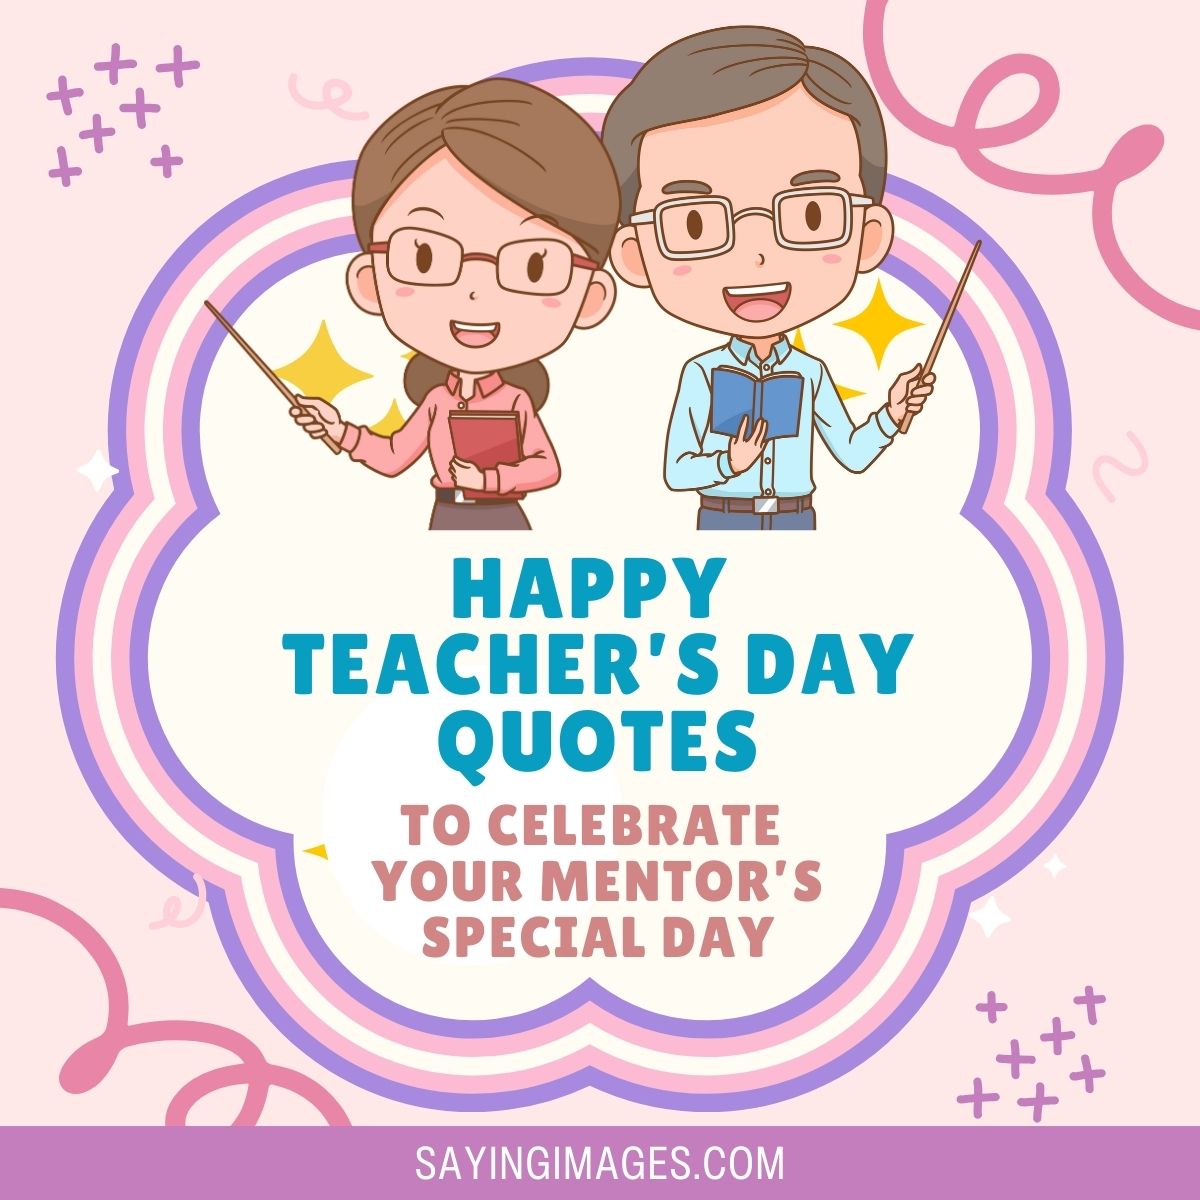 45 Happy Teacher’s Day Quotes And Messages